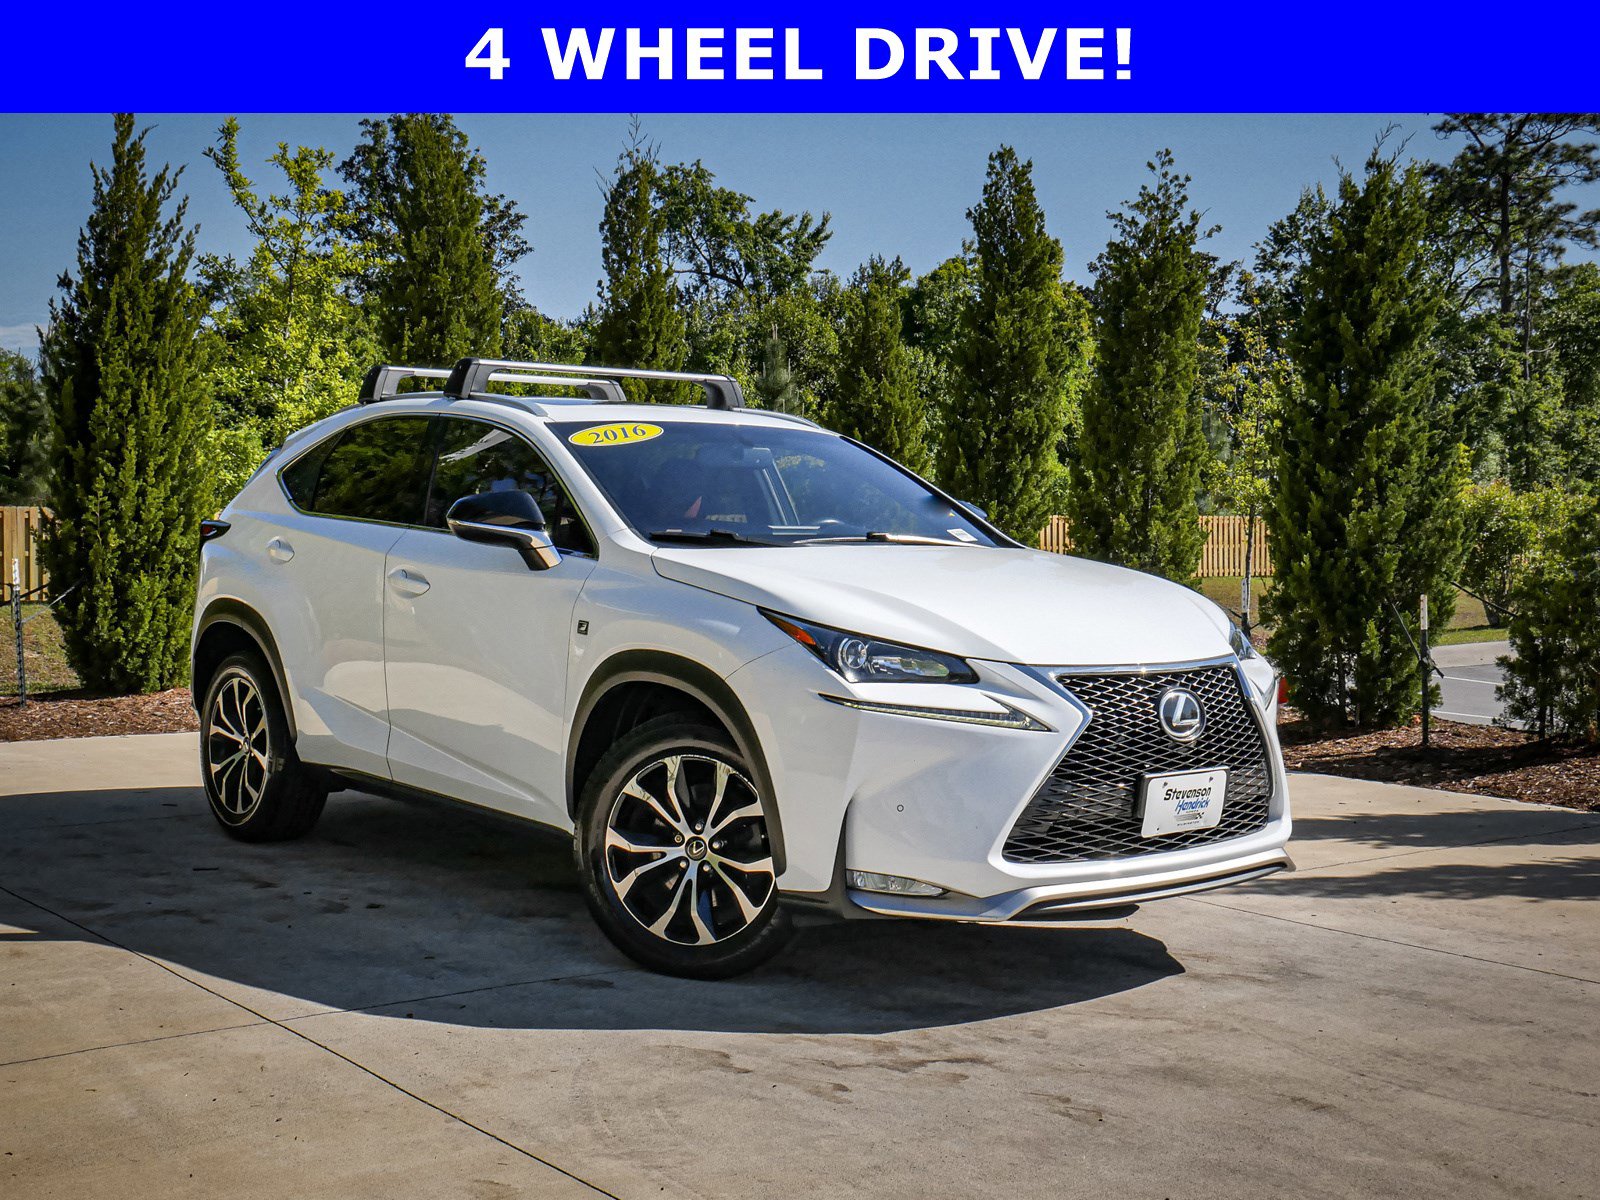 Pre-Owned 2016 Lexus NX 200t F Sport SUV in Cary #DQ17876A | Hendrick Dodge  Cary